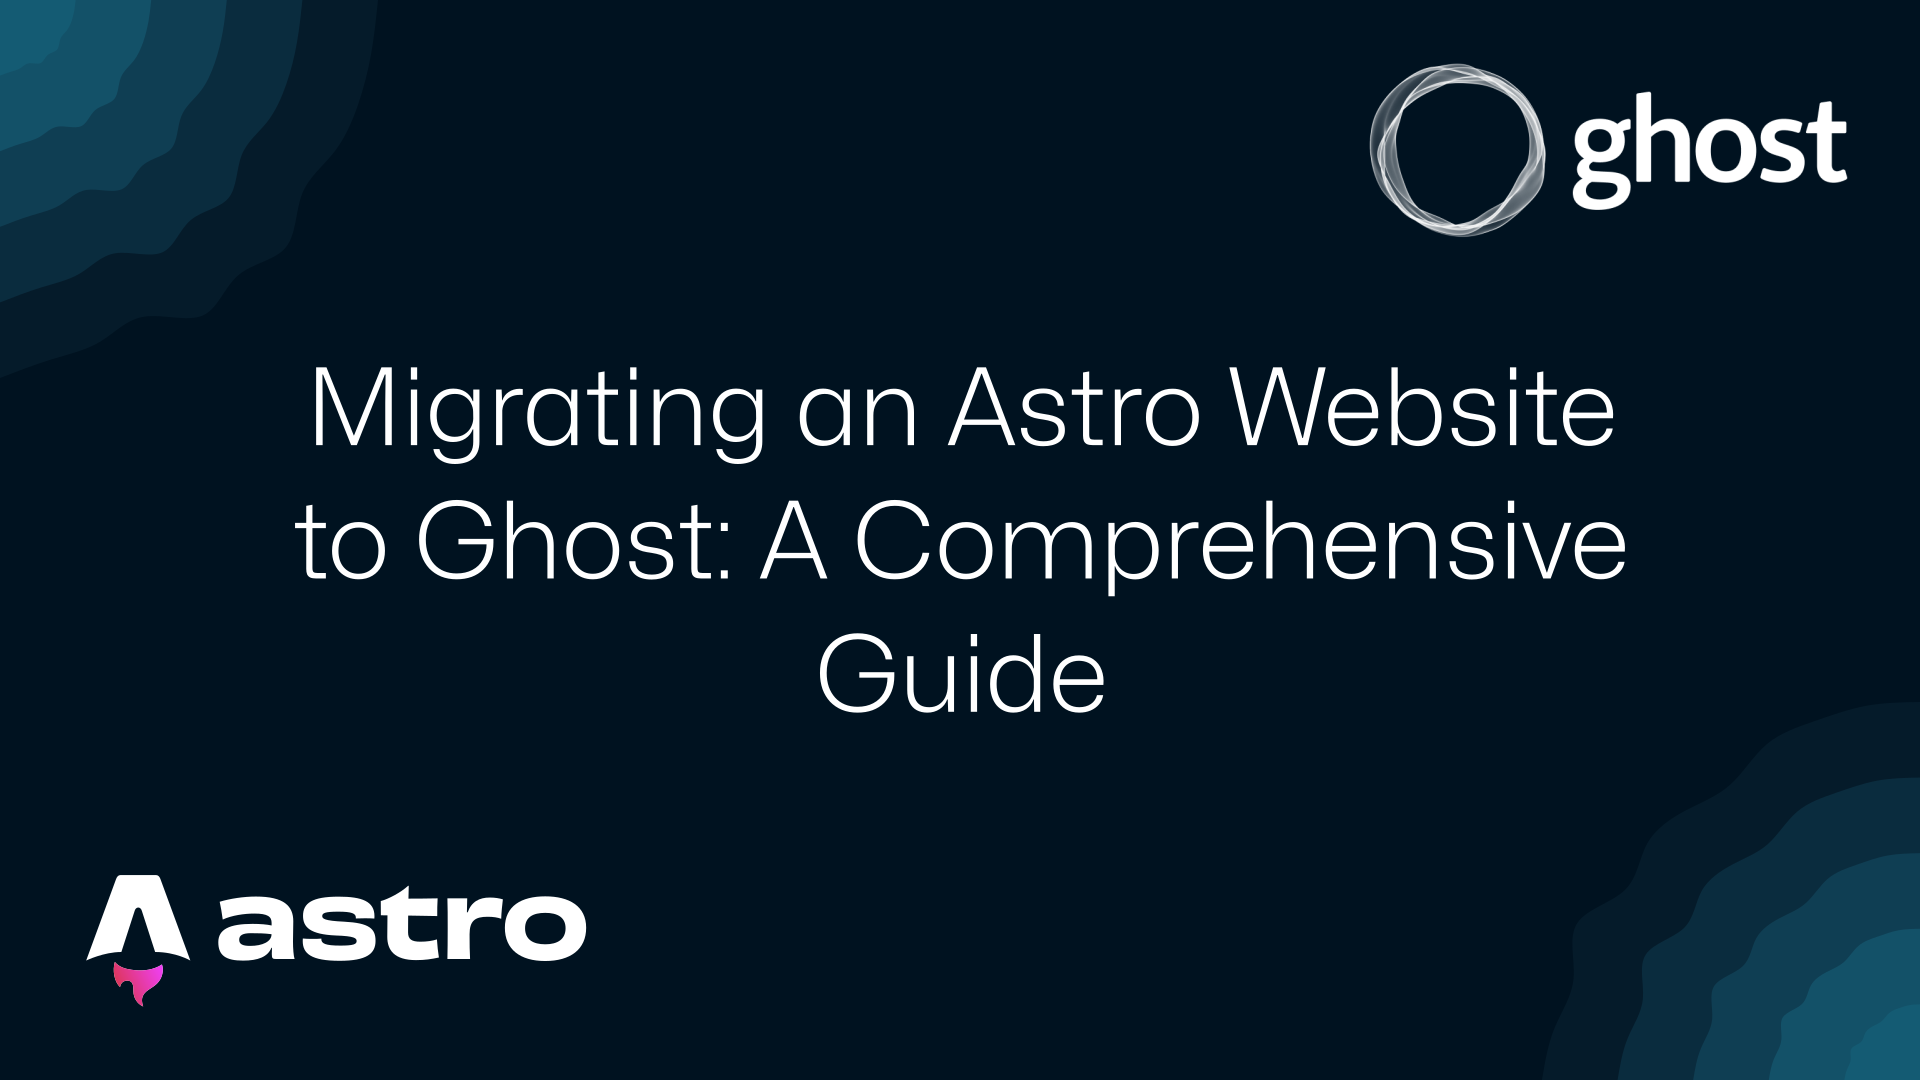 Migrating an Astro Website to Ghost: A Comprehensive Guide